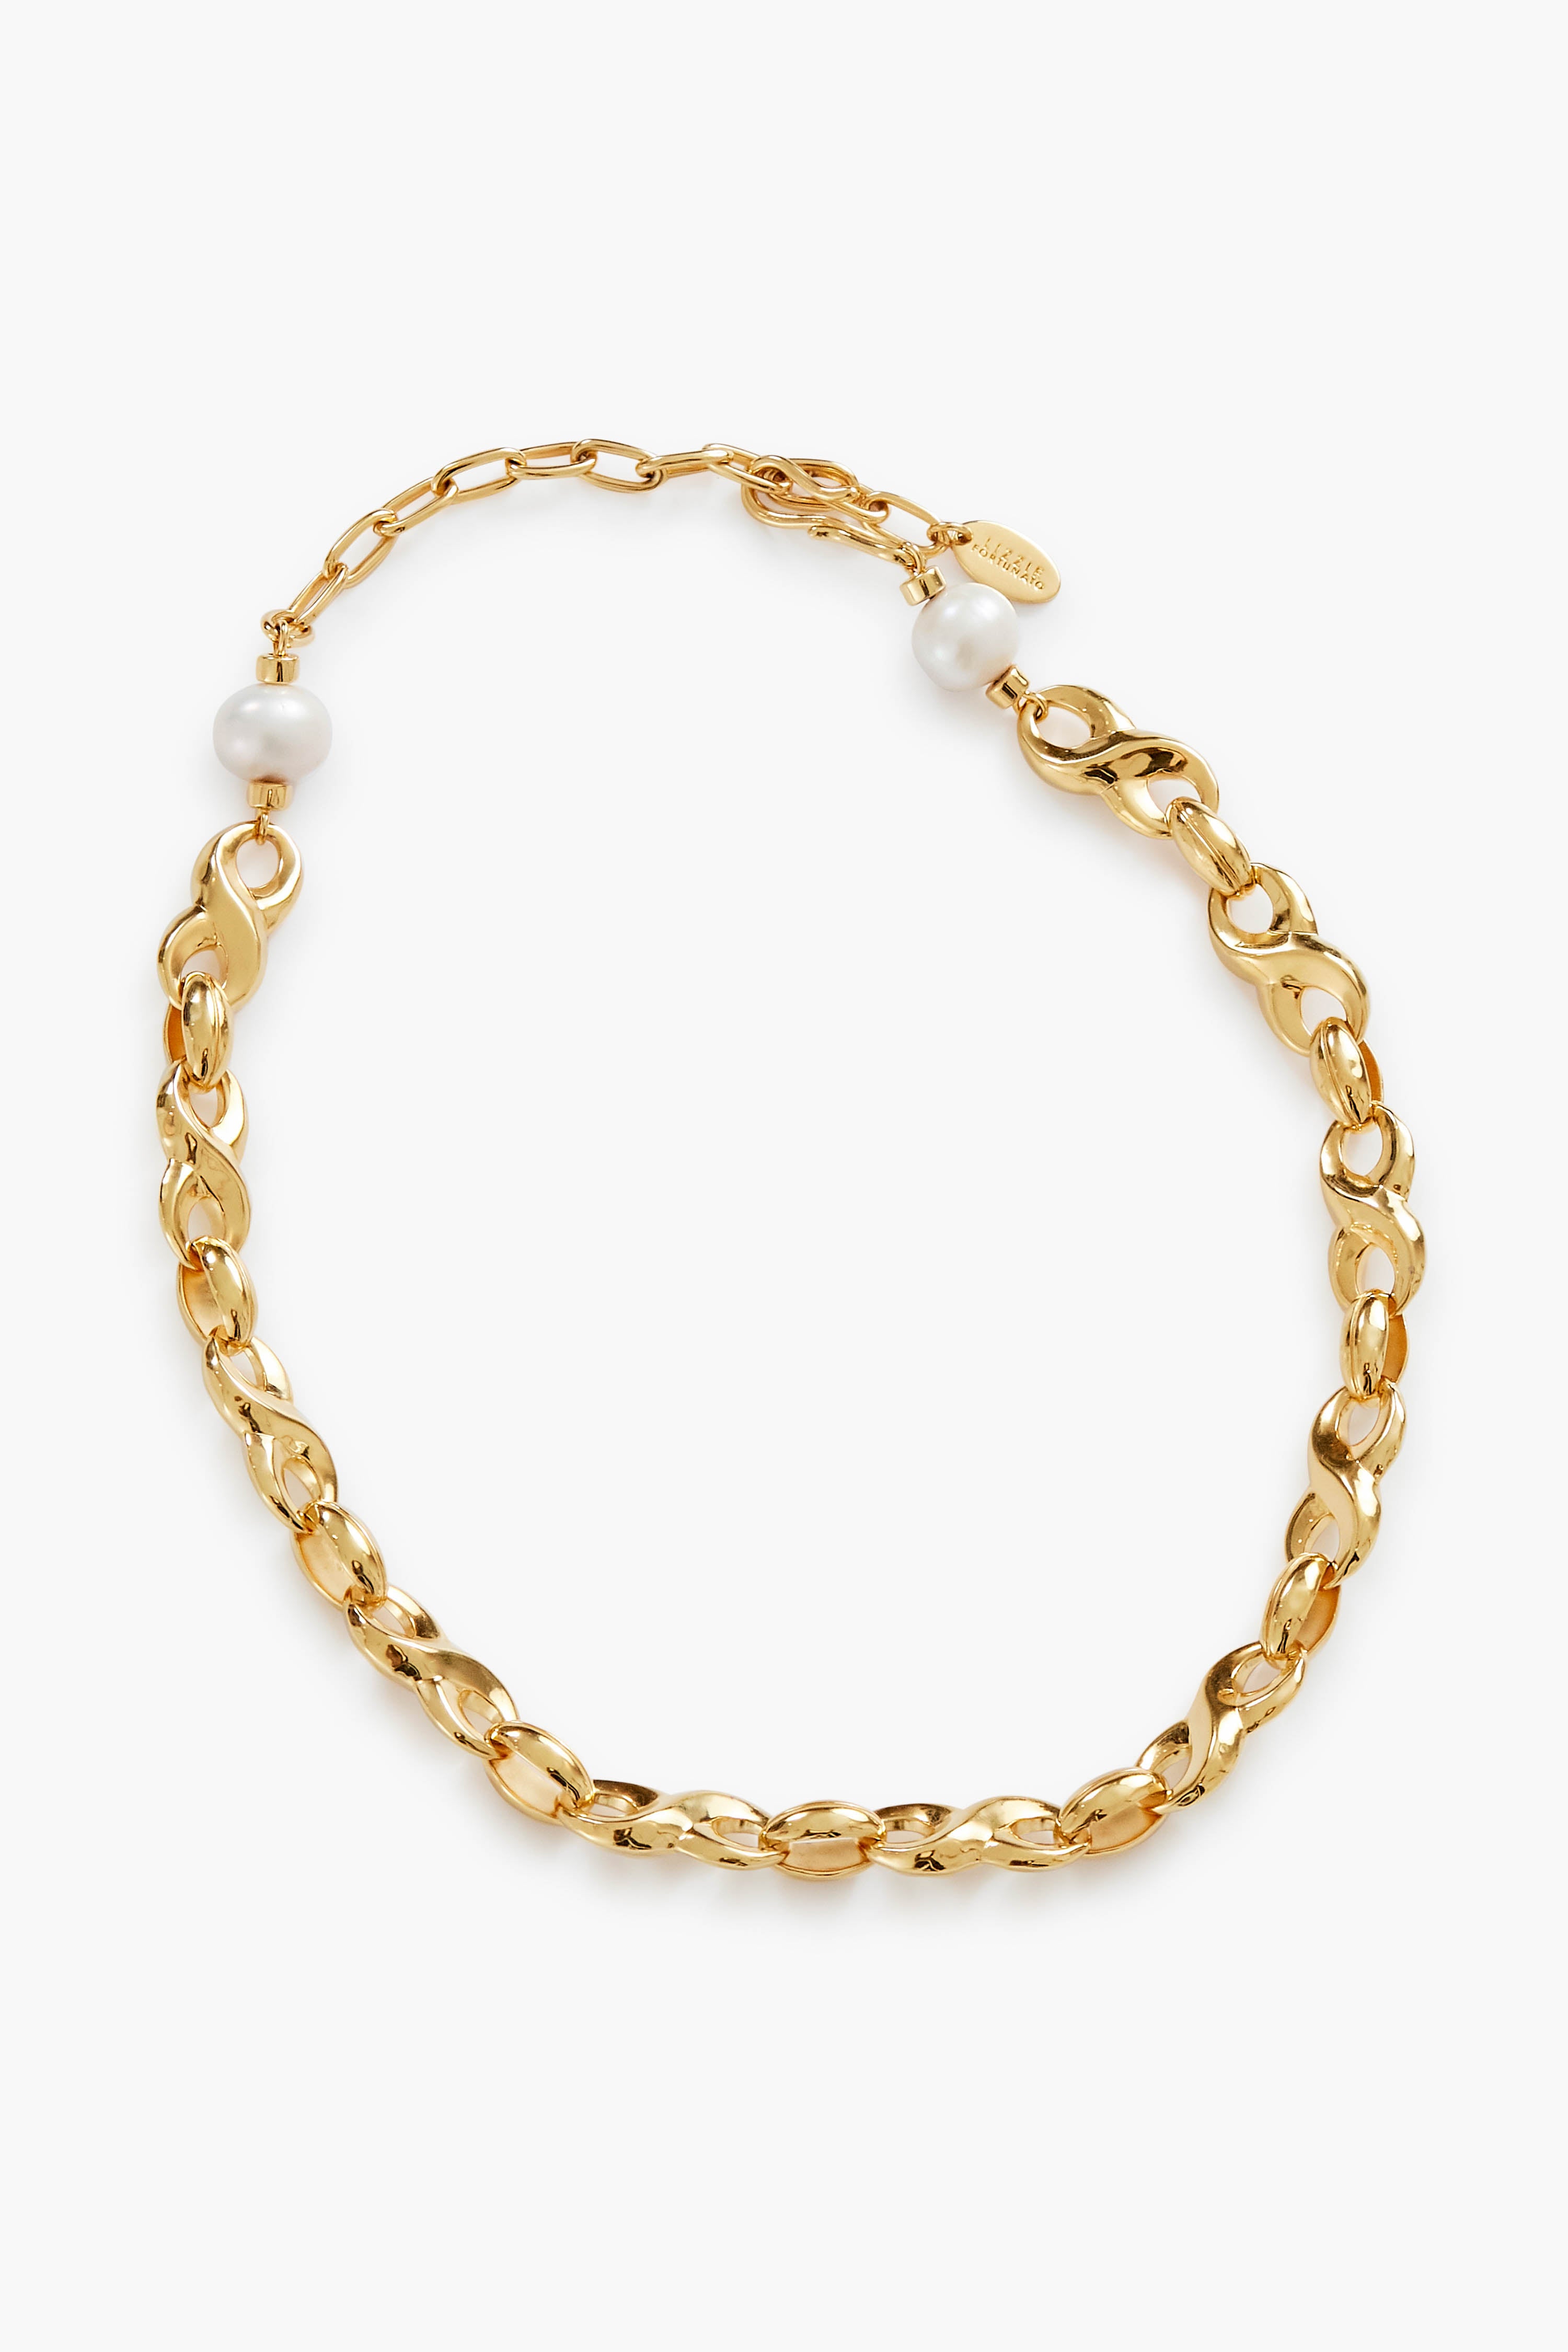 Gold Infinity Link Necklace